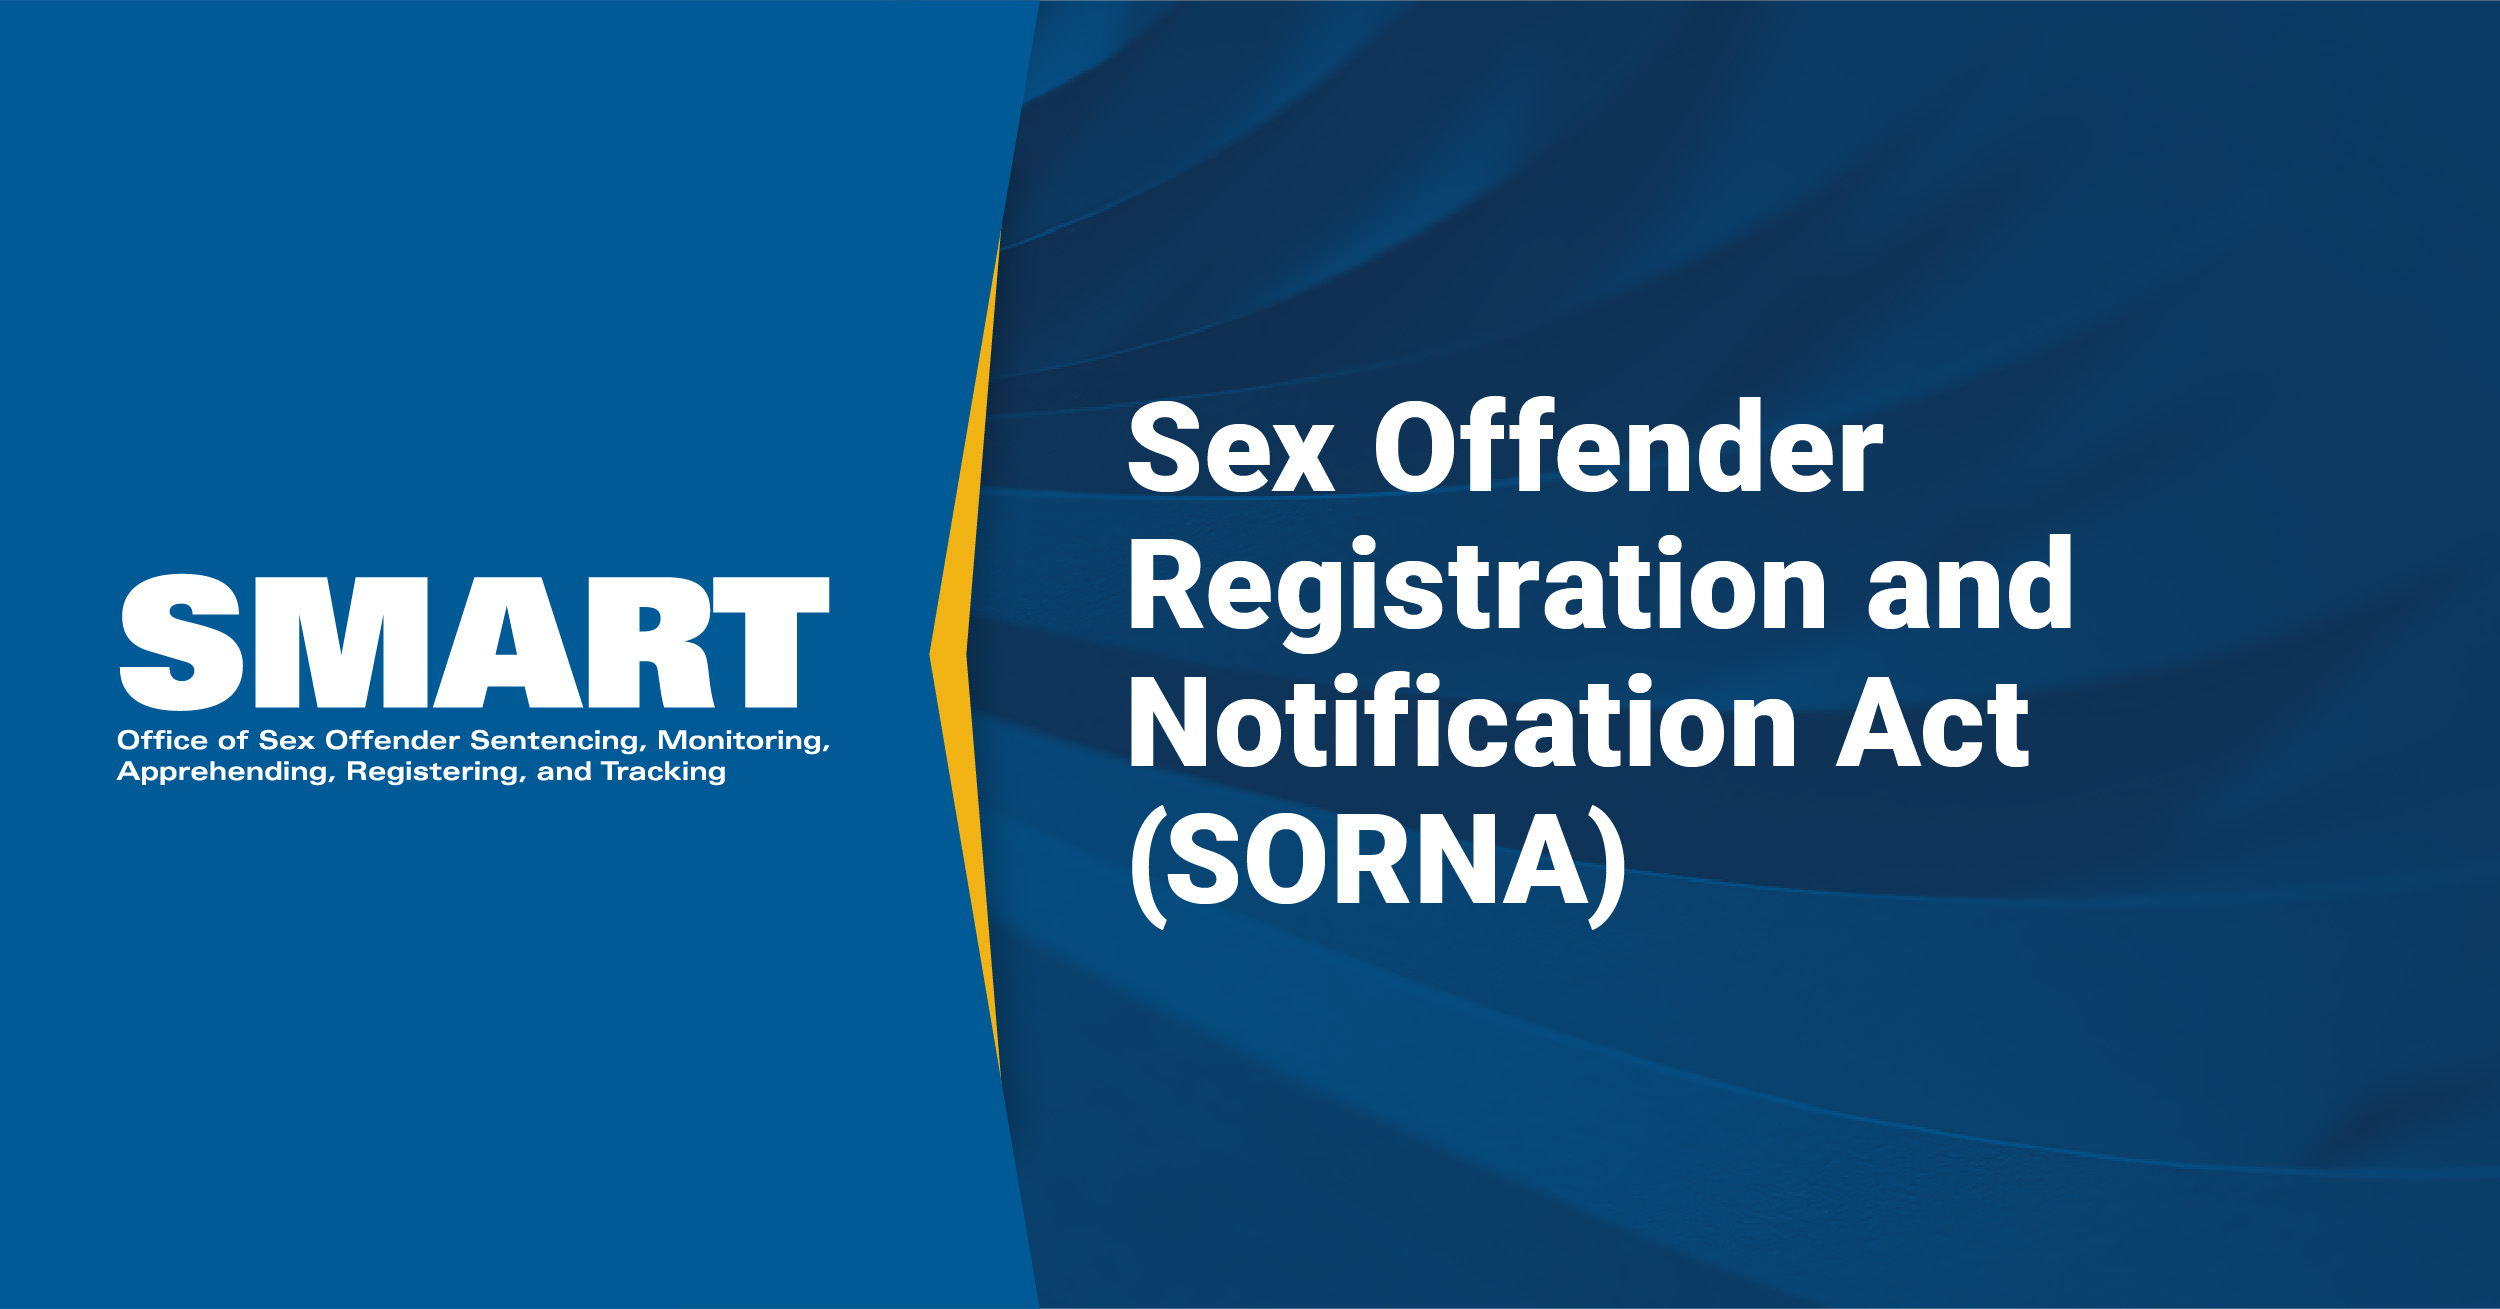 SORNA Implementation Status Office of Sex Offender Sentencing, Monitoring, Apprehending, Registering, and Tracking